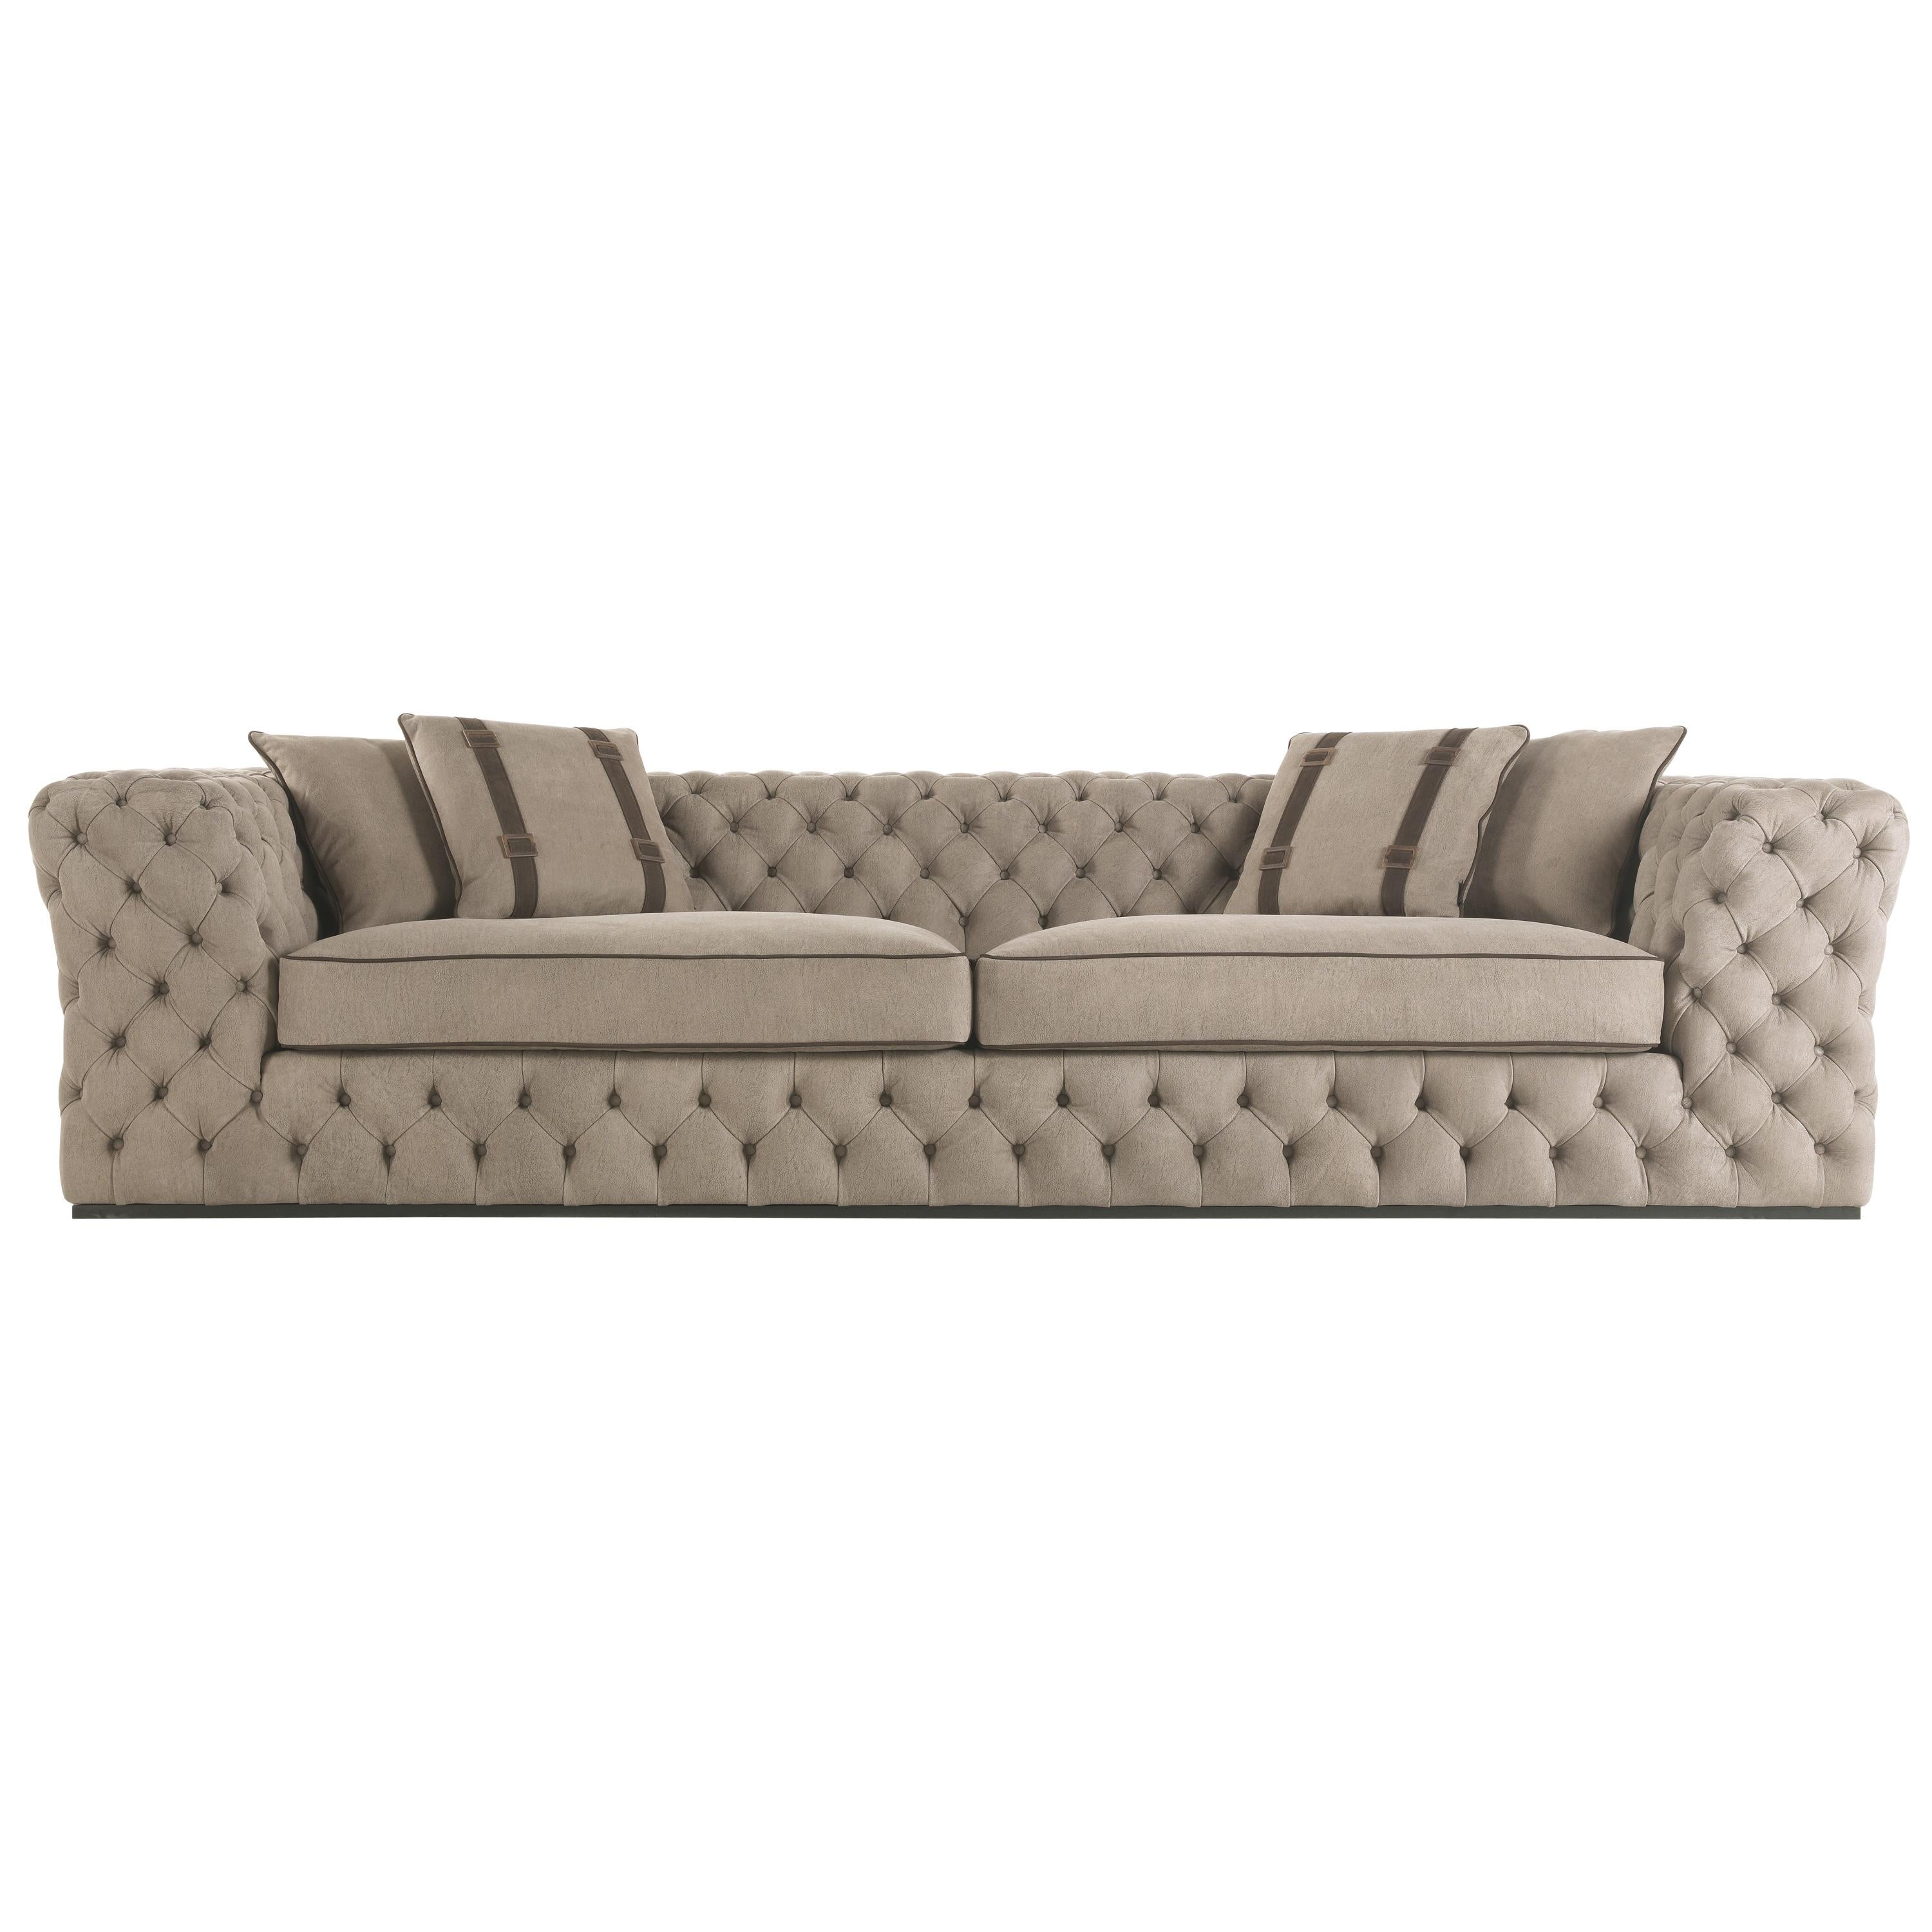 21st Century King's Cross Sofa in Leather by Gianfranco Ferré Home